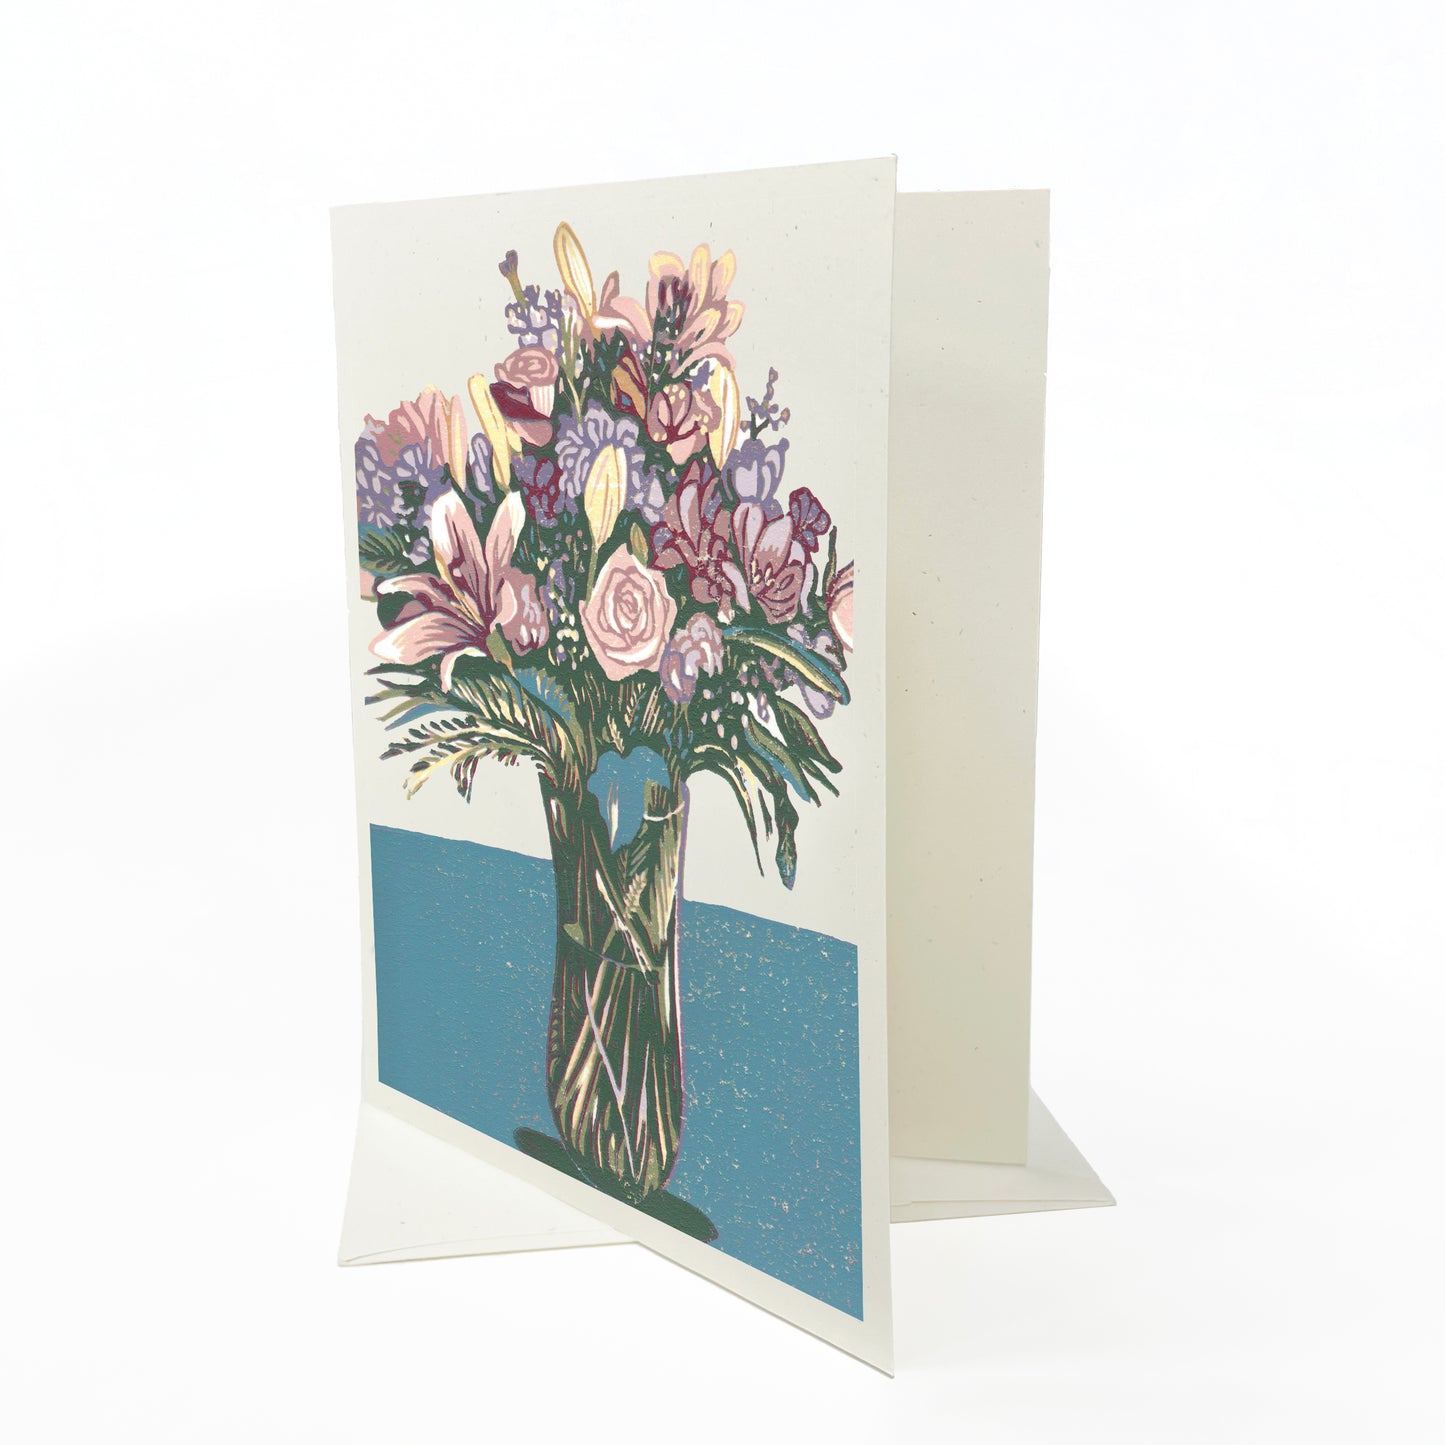 Bouquet.  A casually elegant card featuring a digital reproduction of a block print design with the same title by Natalia Wohletz of Peninsula Prints, Milford and Mackinac Island, Michigan.